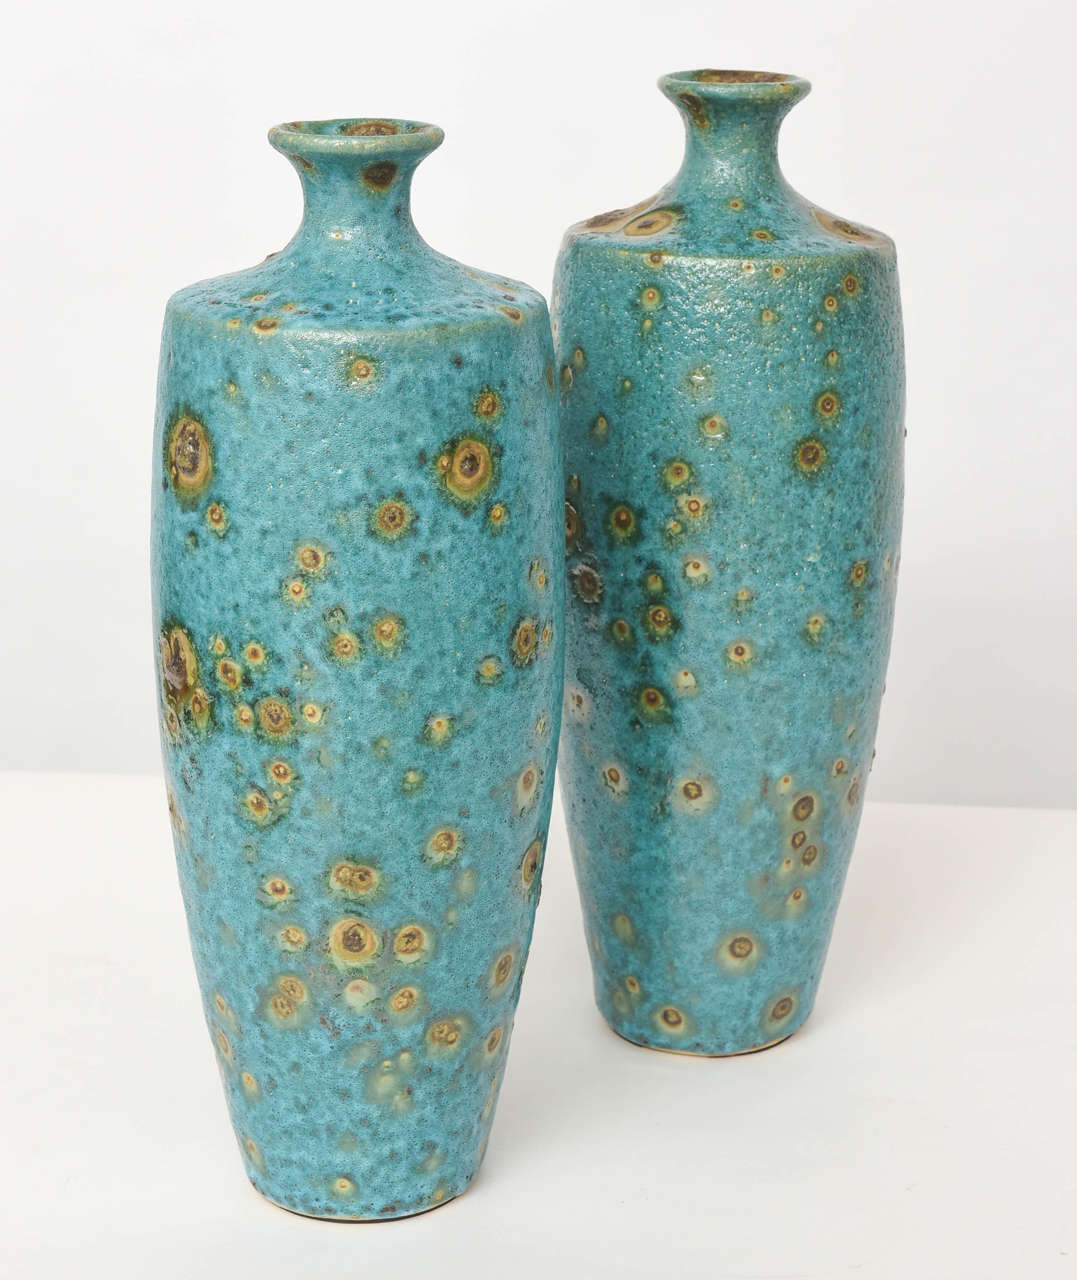 The glaze in turquoise and with golden bursts, all with a mottled finish.